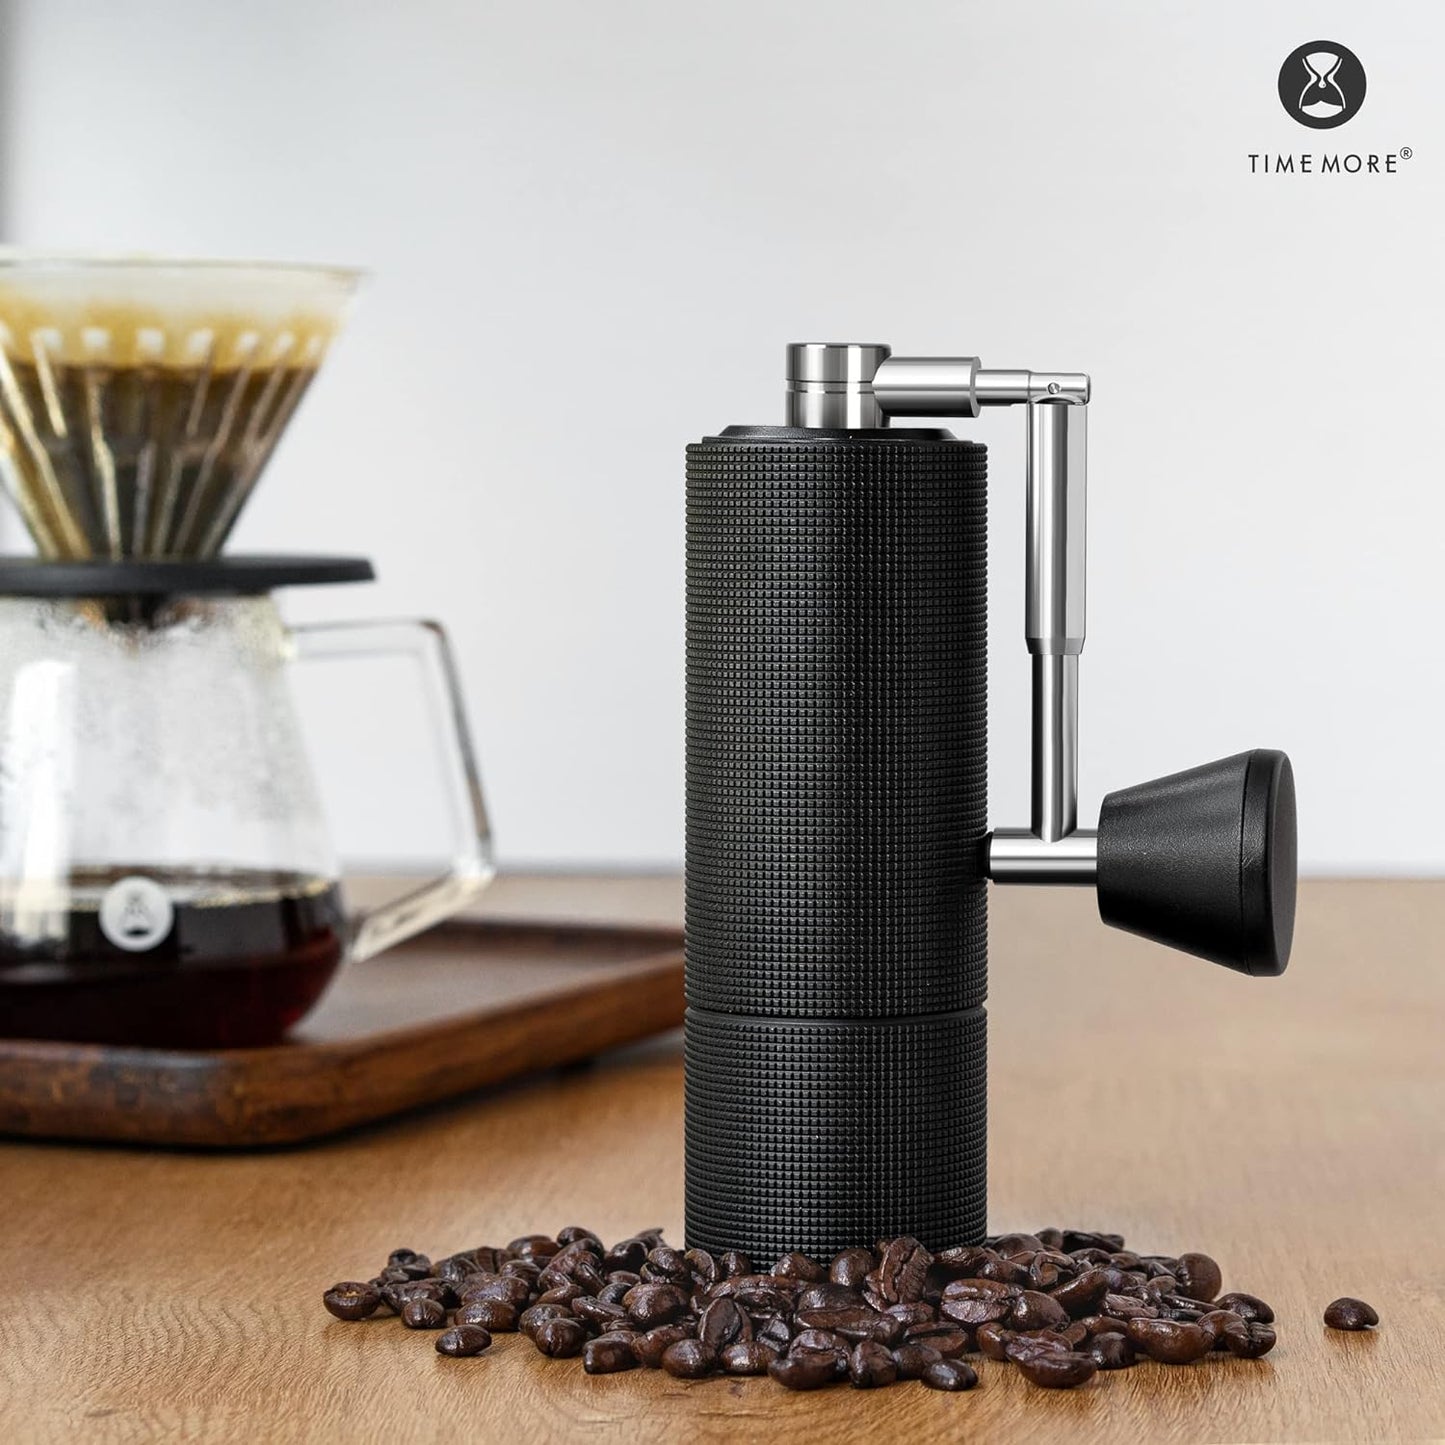 TIMEMORE Chestnut C3 PRO Manual Coffee Grinder